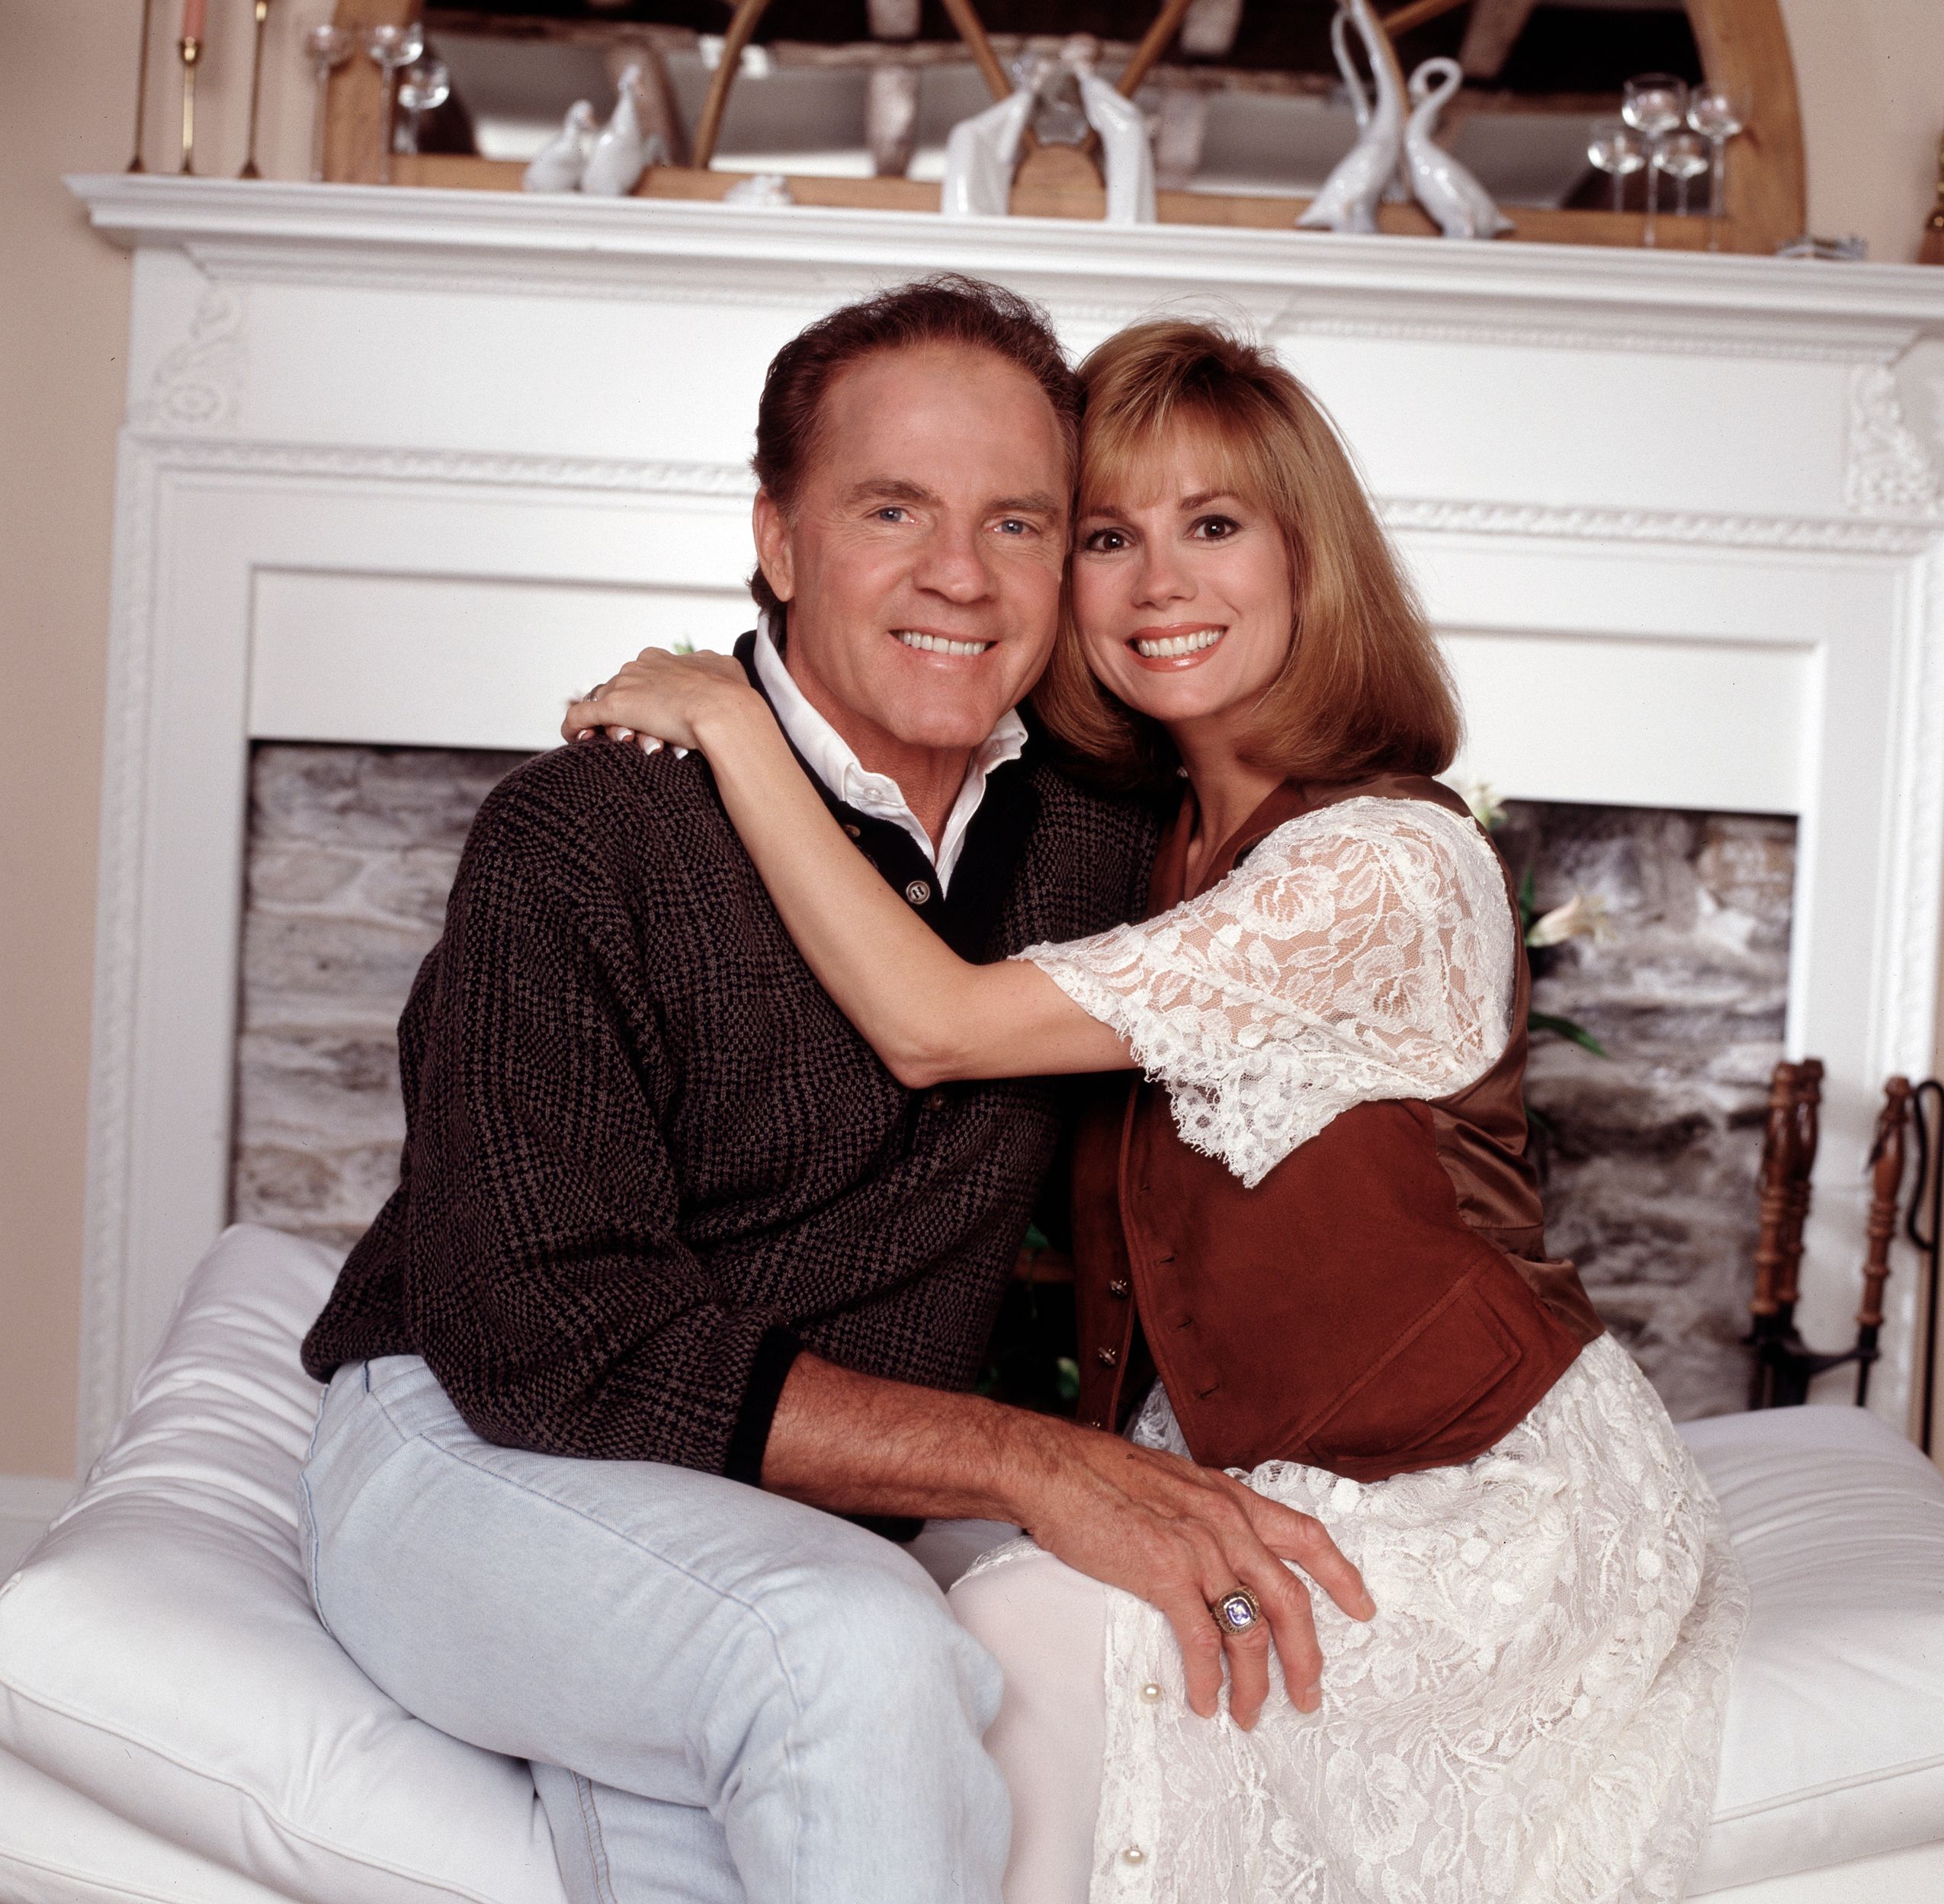 Frank and Kathie Lee Gifford in 1992 | Source: Getty Images